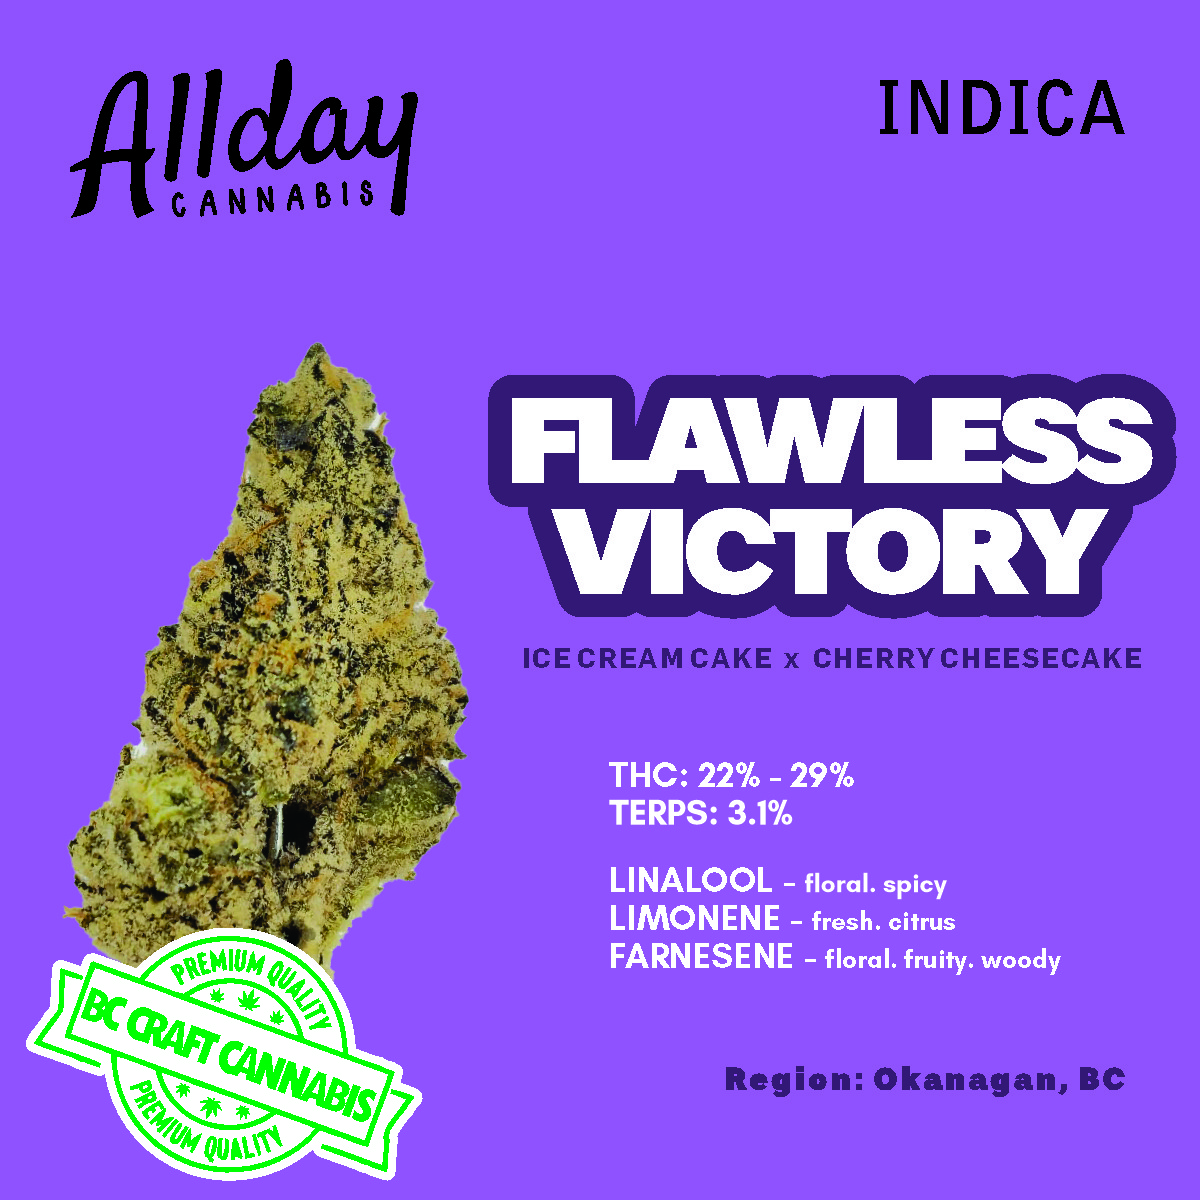 INDICA Flawless Victory